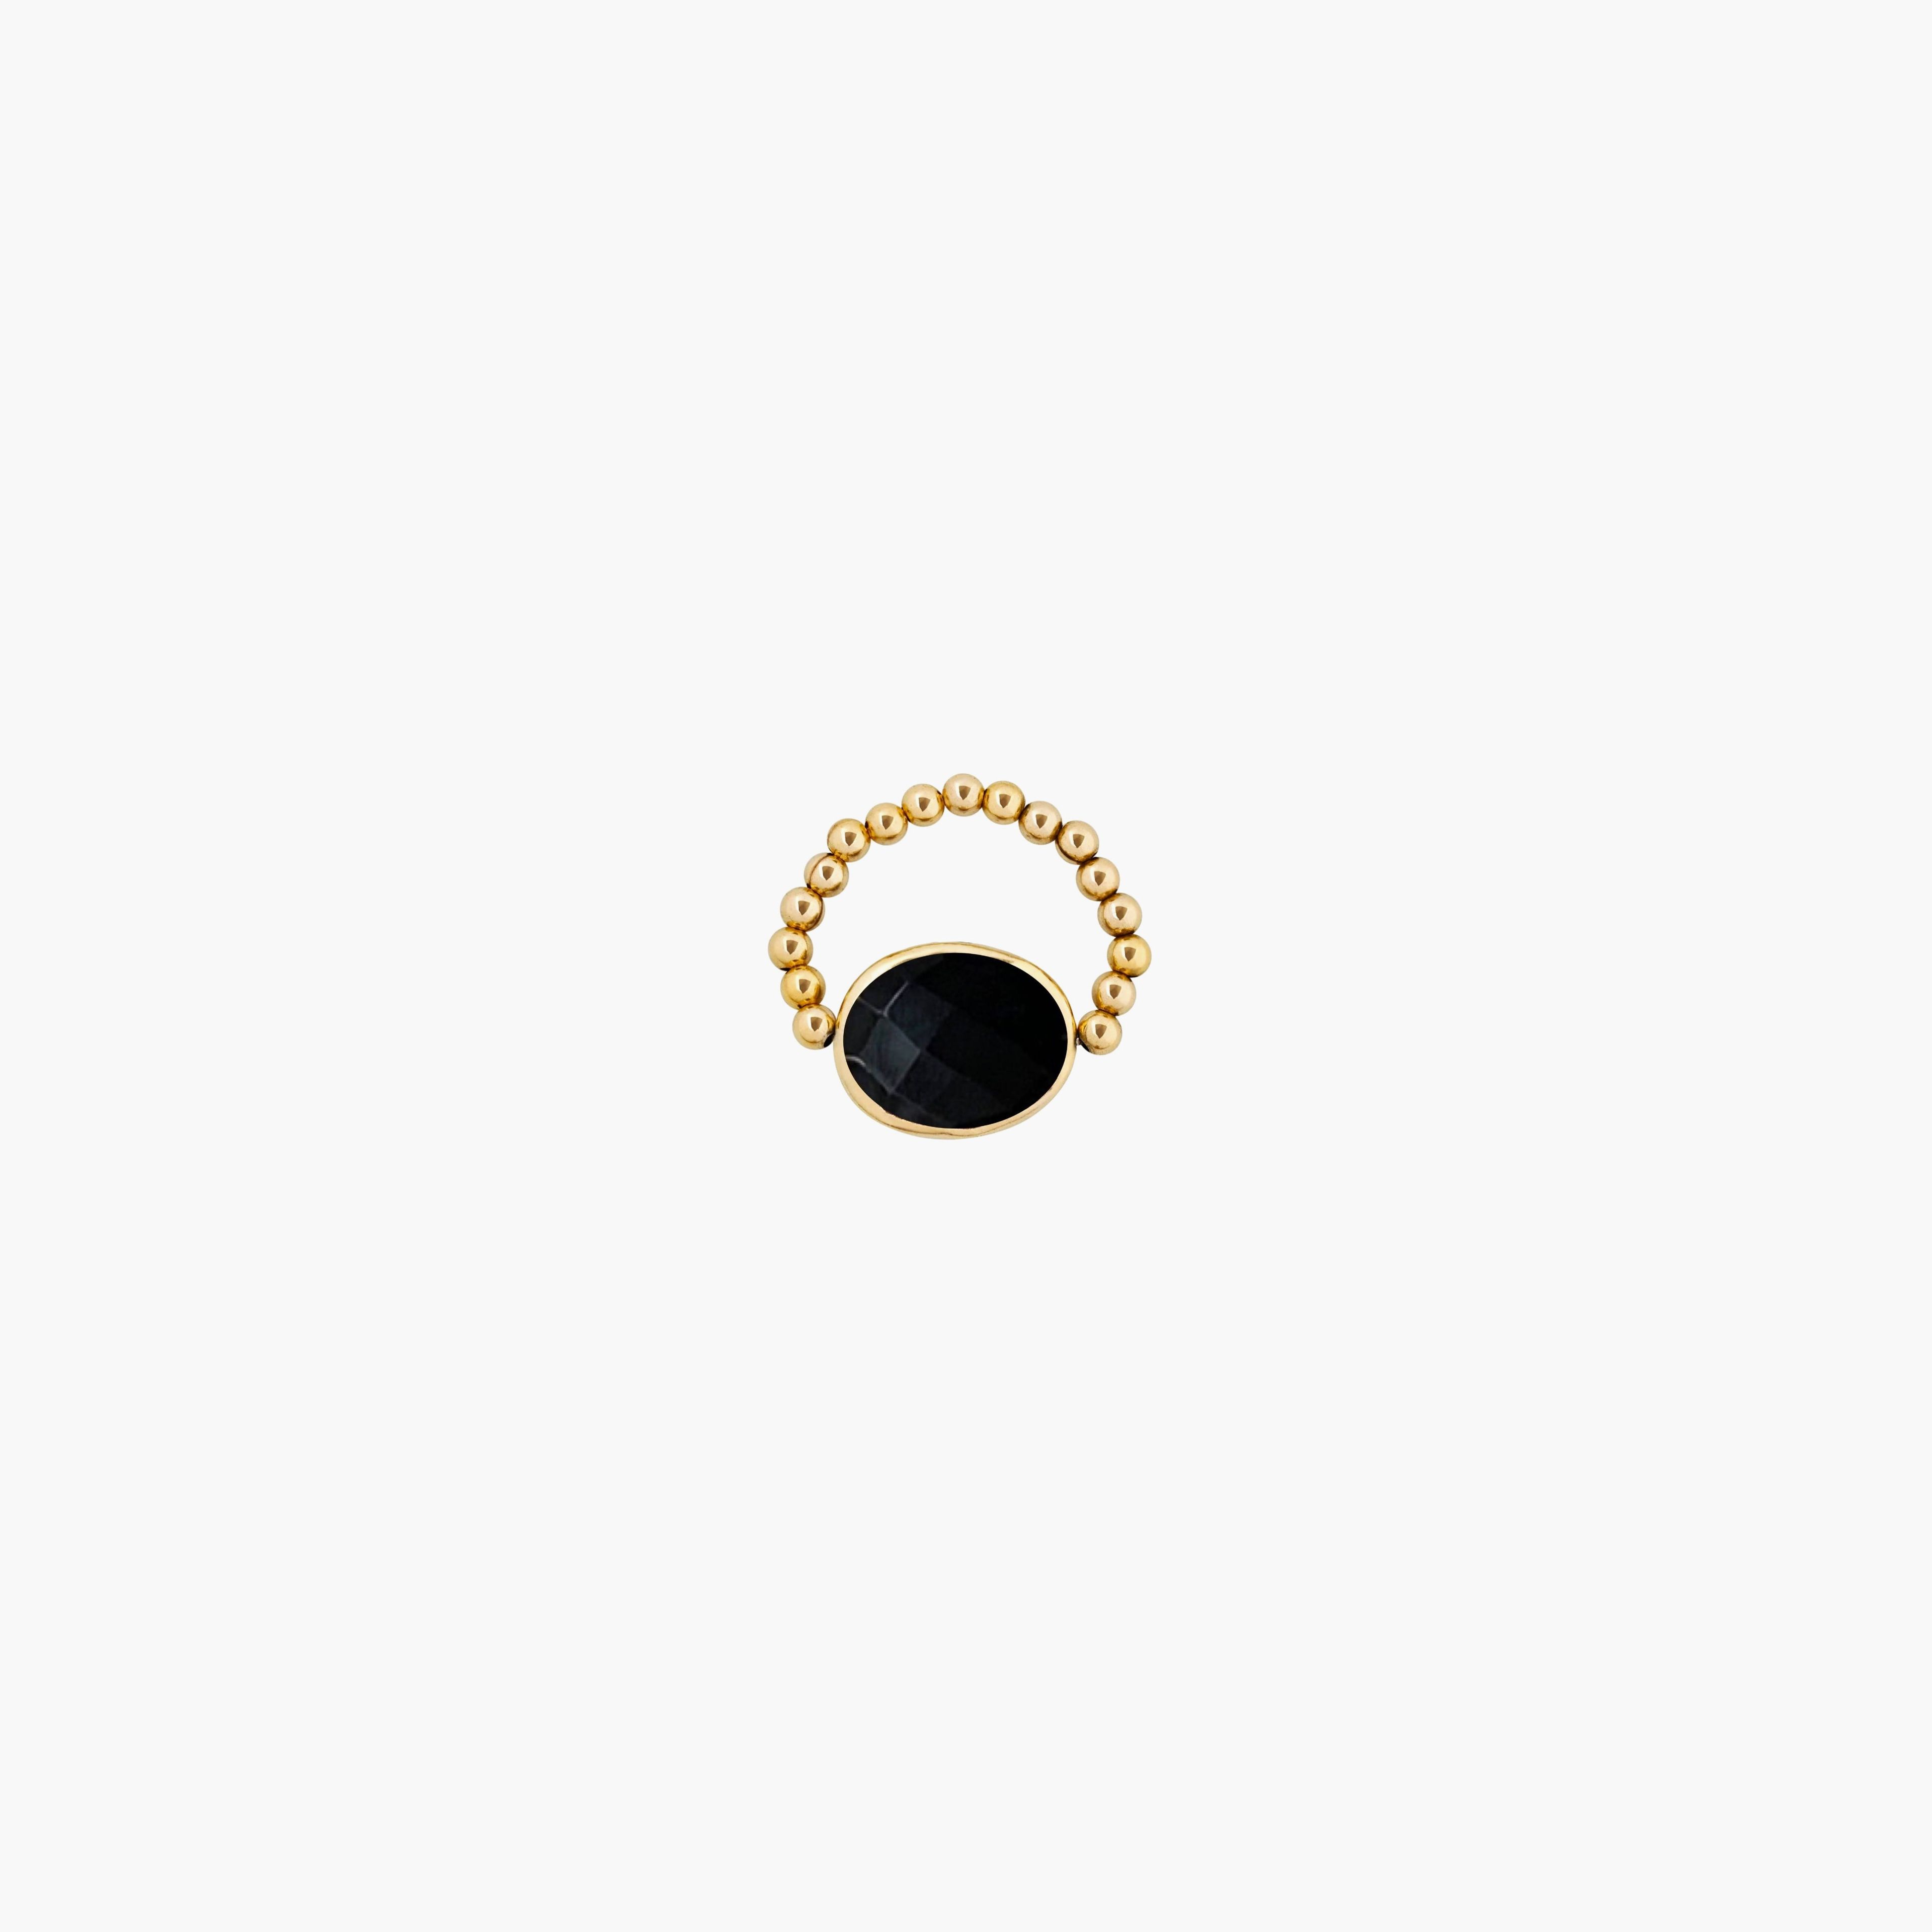 Gold Filled Beaded Black Onyx Ring